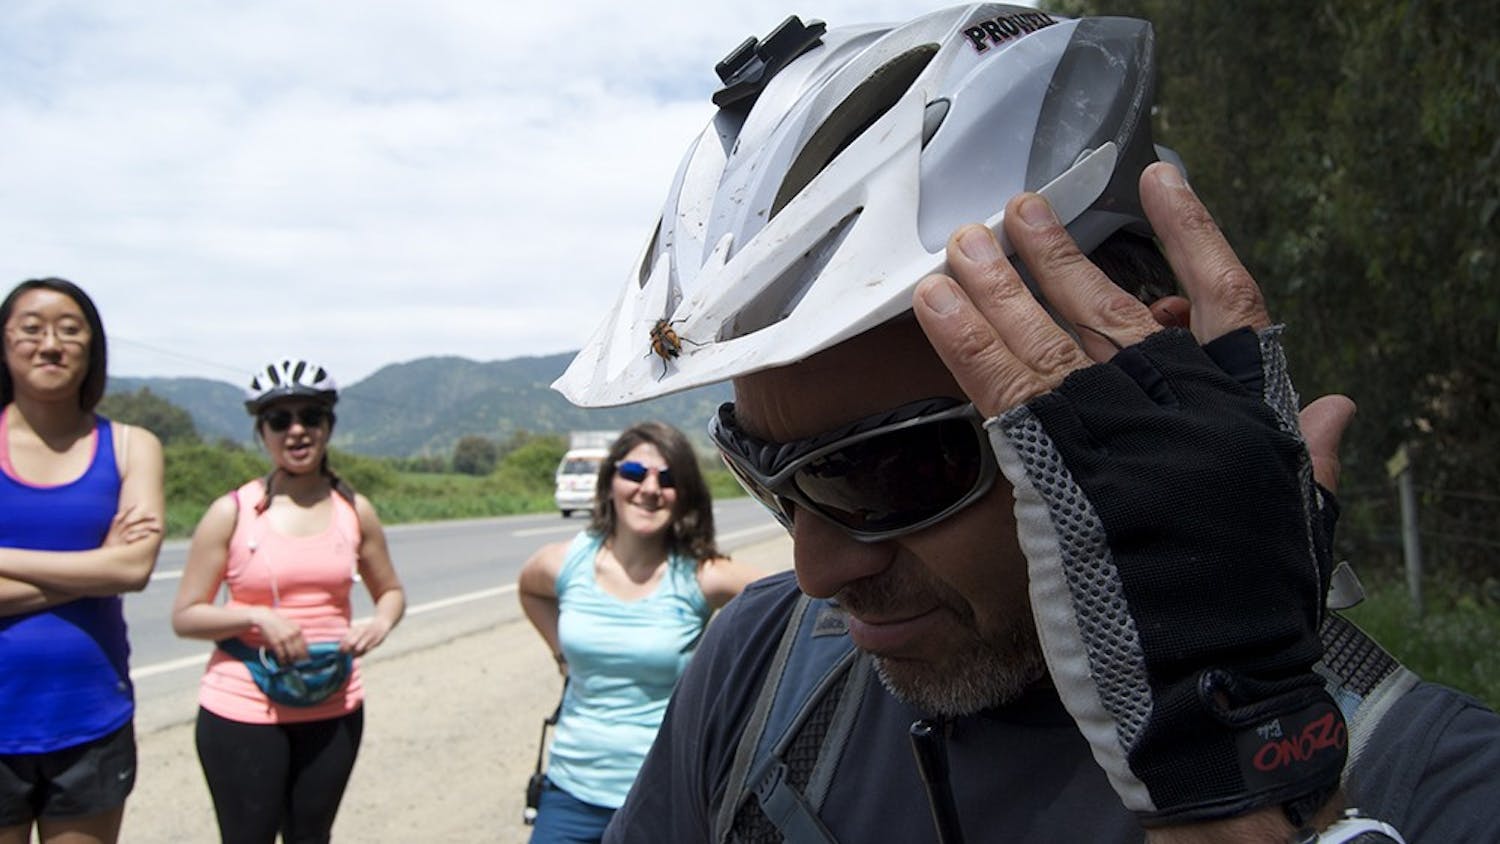  Pablo, our bike tour guide, introduced the group to what Chileans call the "pololo" bug. Pololo means "boyfriend" and the Pololo bug got its name from being annoyingly clingy, like a Chilean pololo, Pablo said. 
